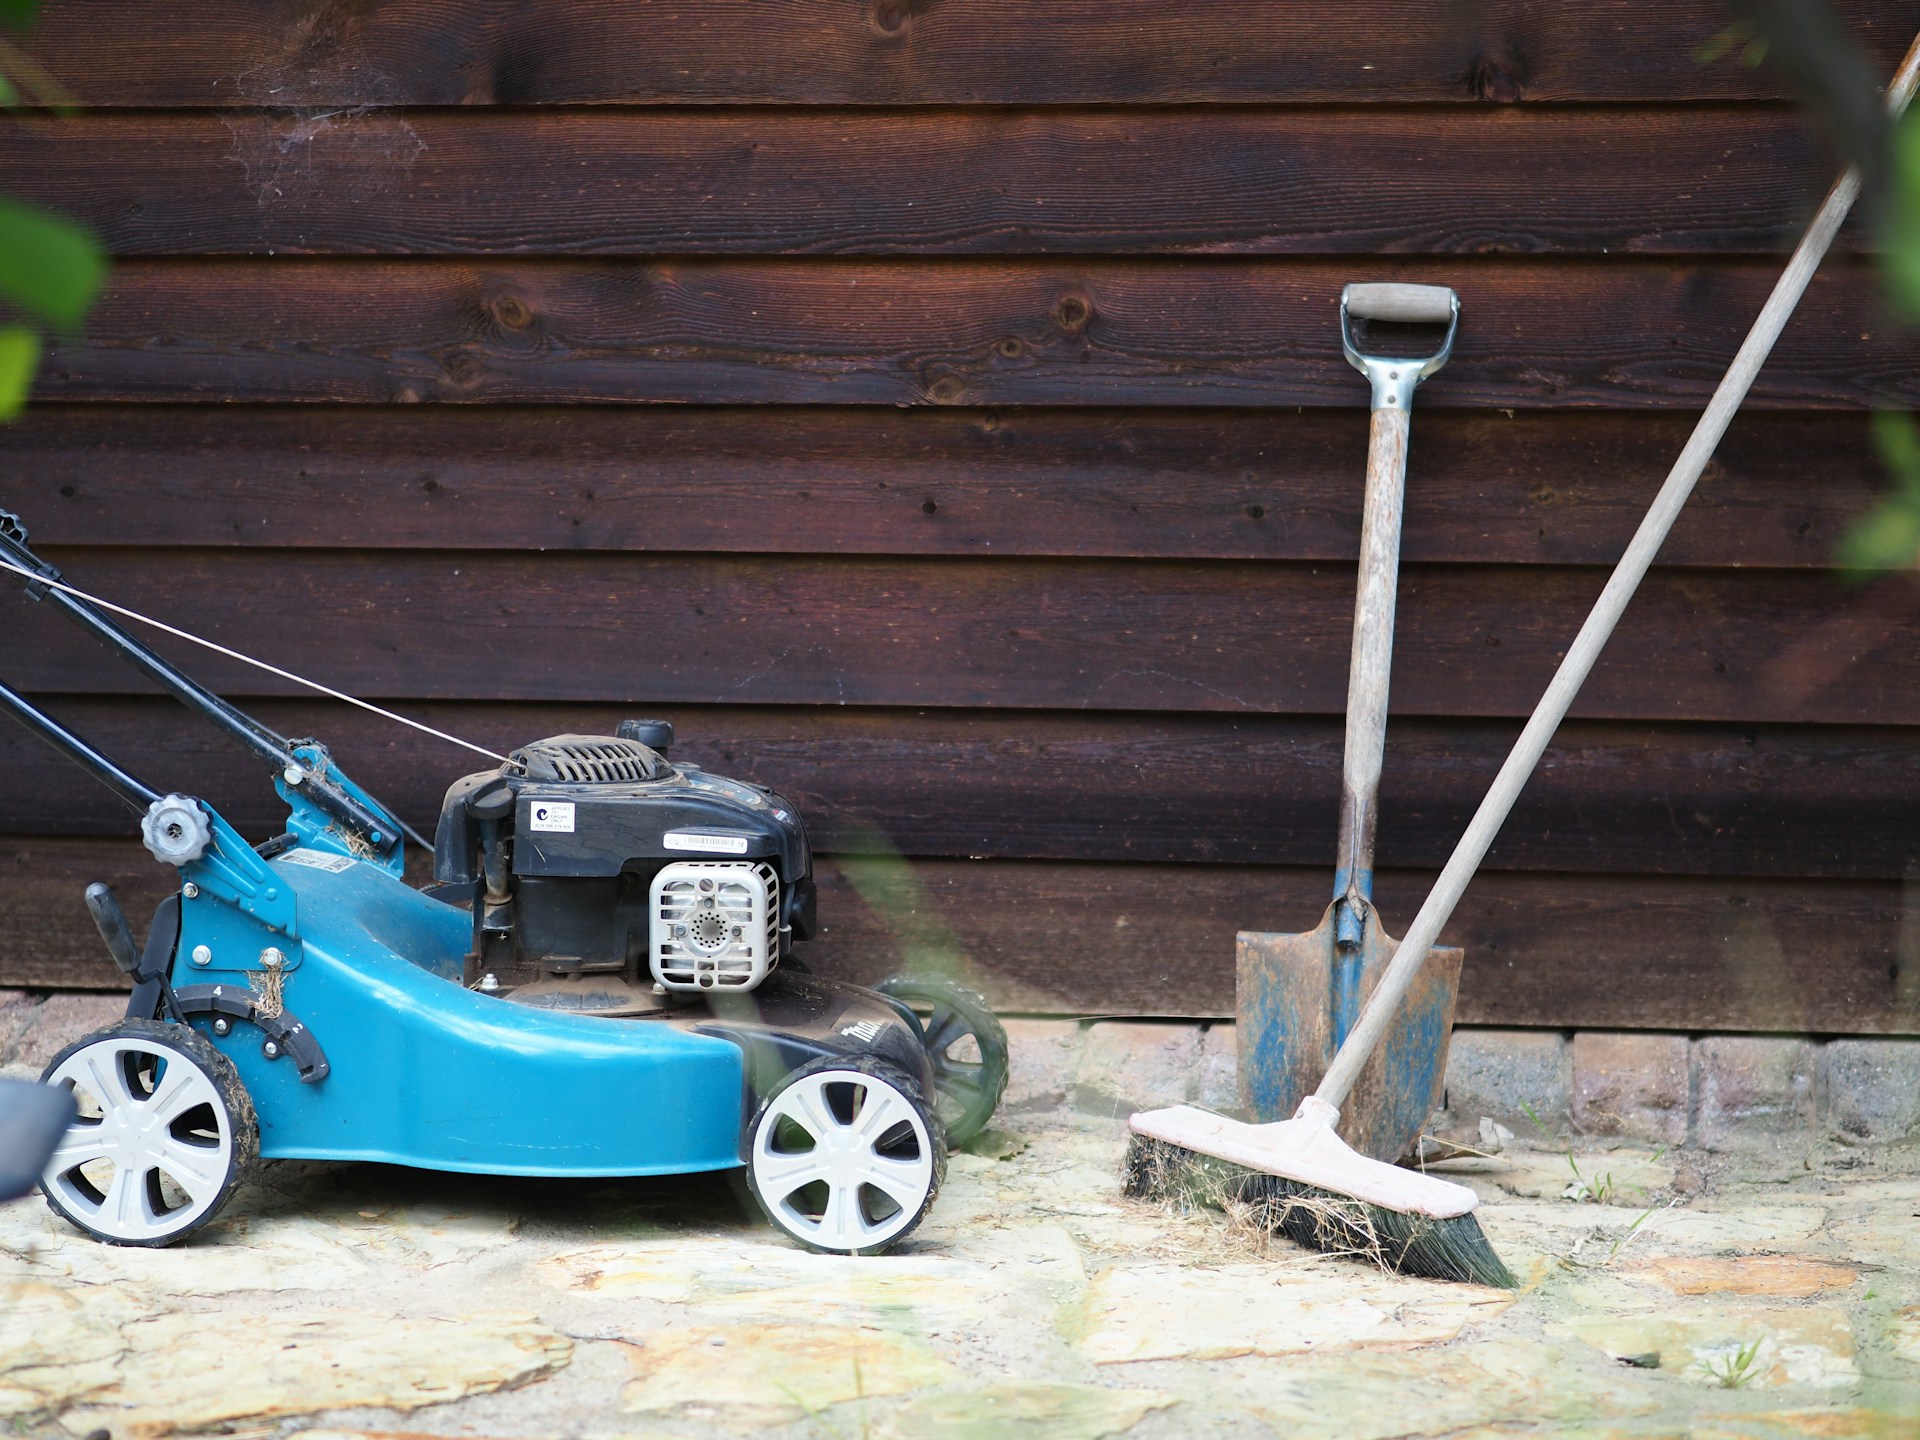 A lawn mower, a broom, and a shovel set against a shed.